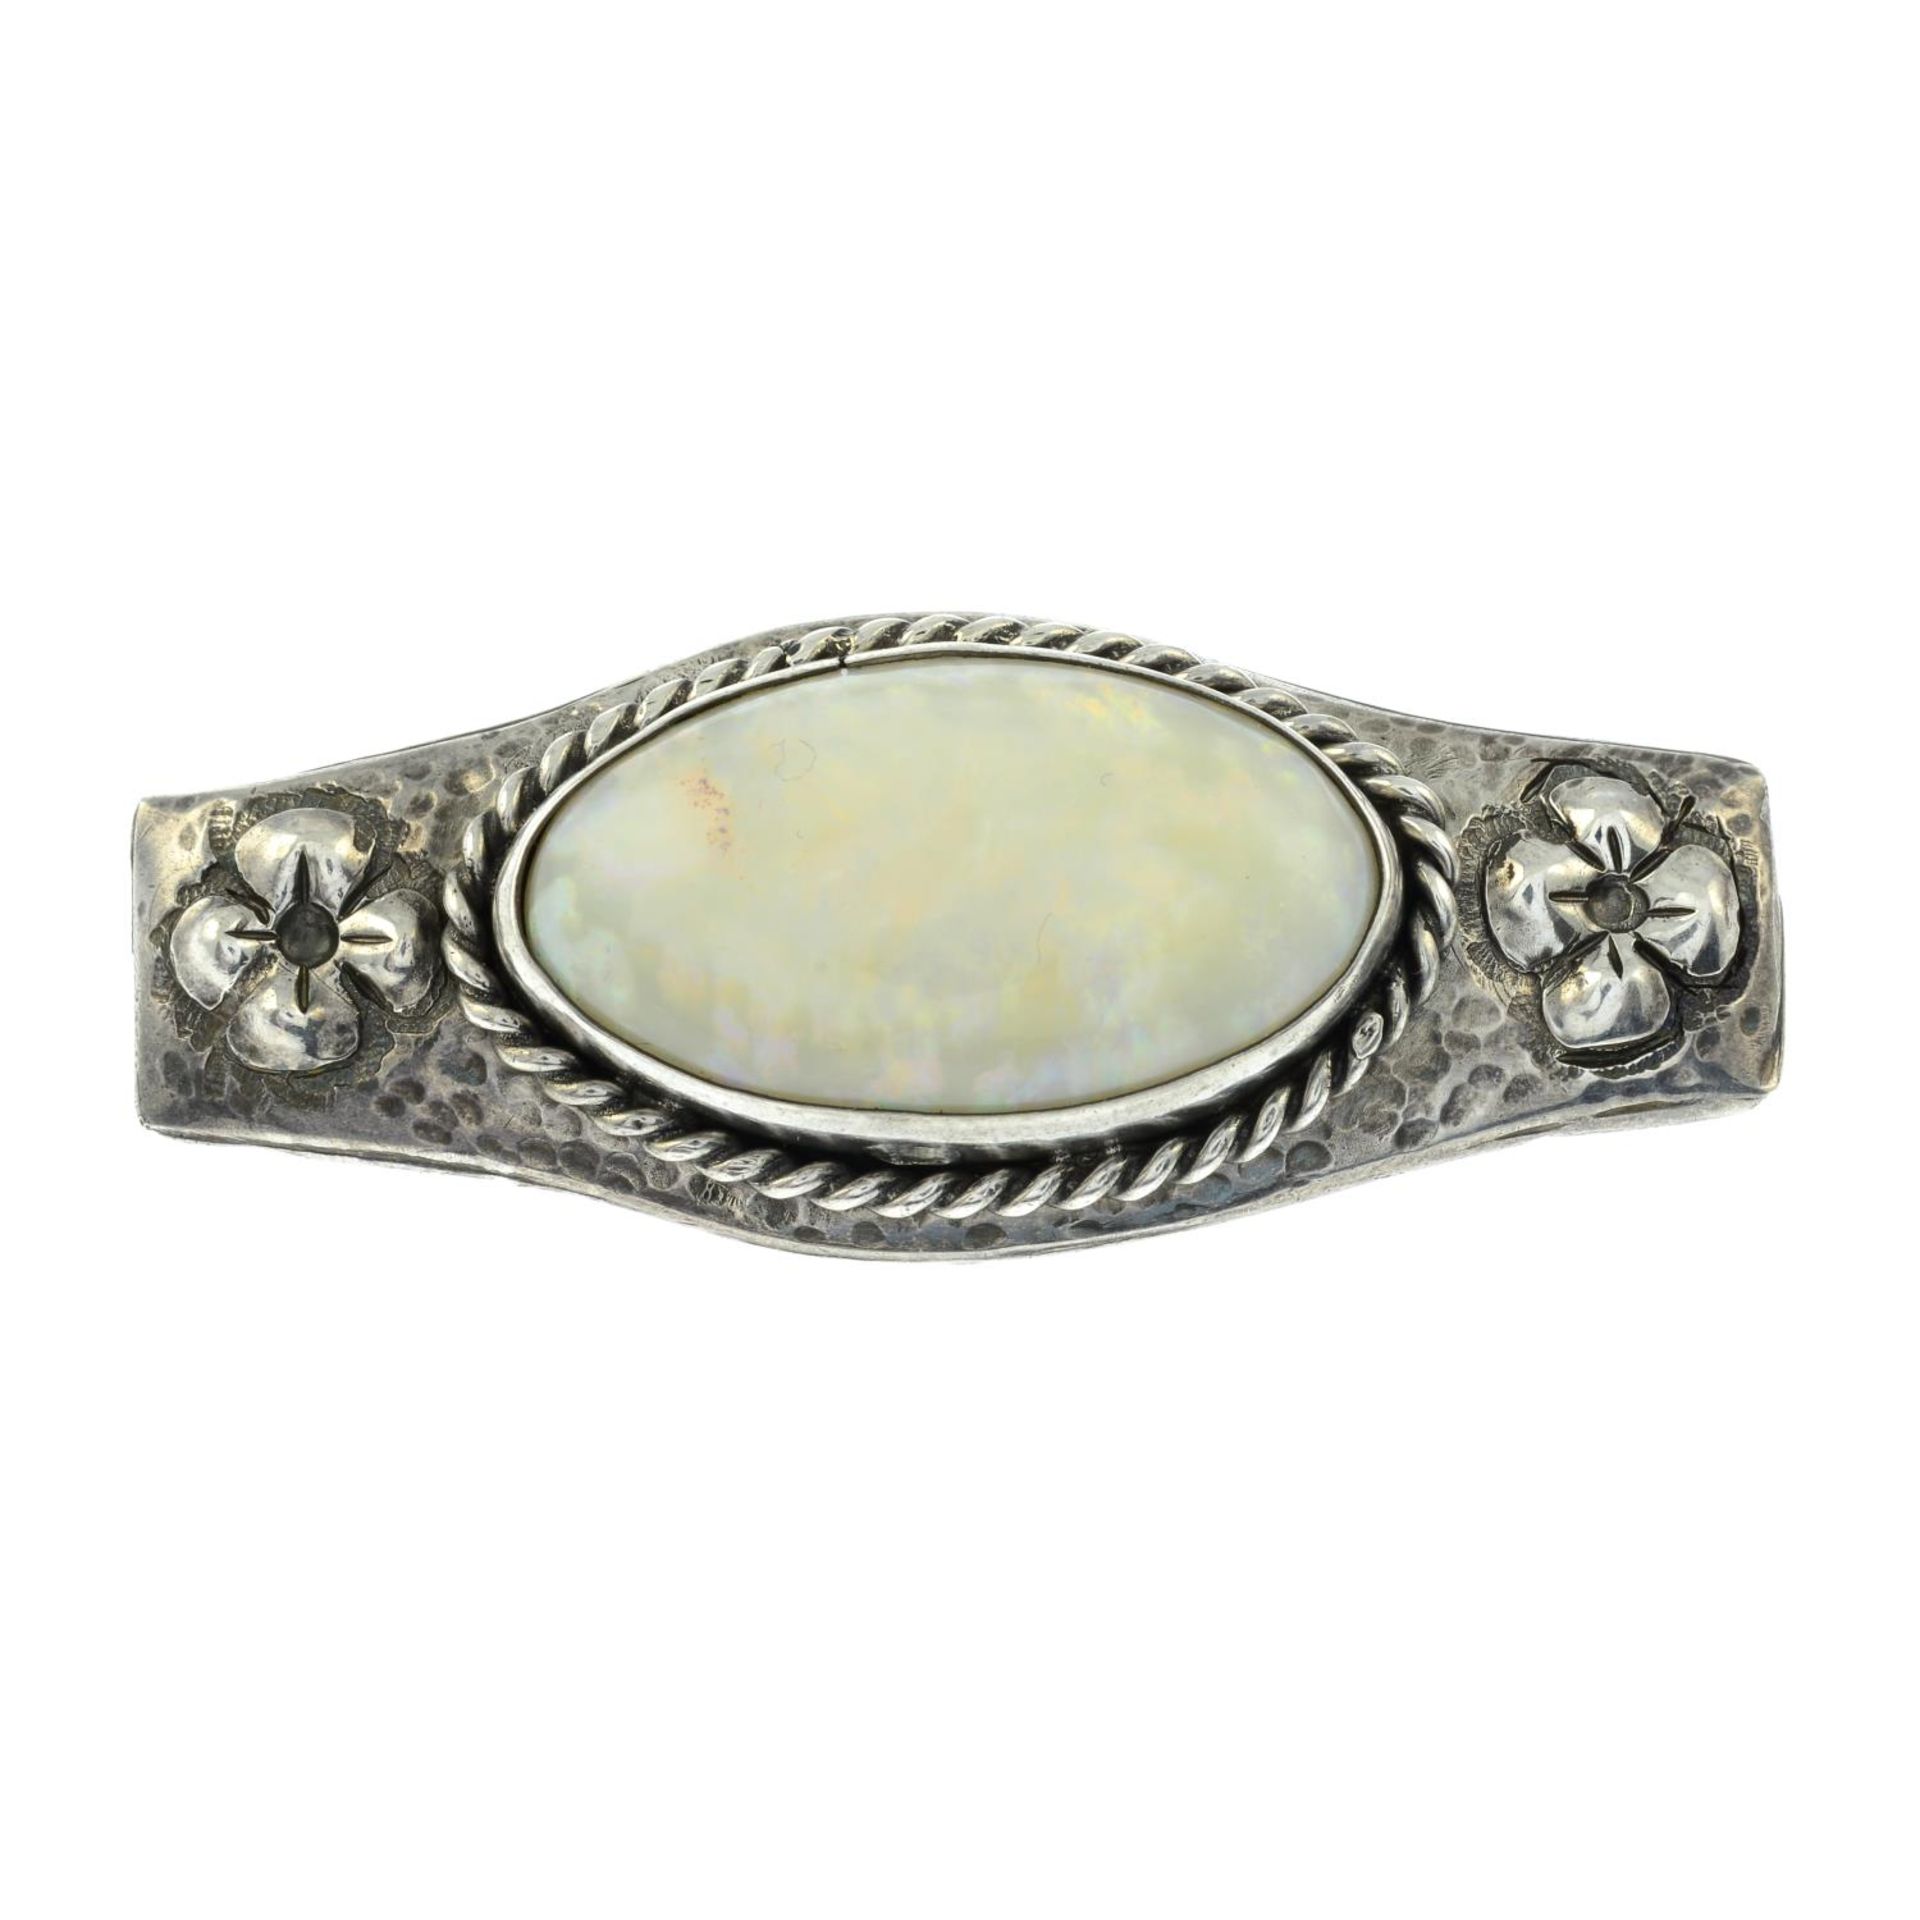 An Arts and Crafts silver opal brooch, in the manner of Mary Thew.Length 5cms.